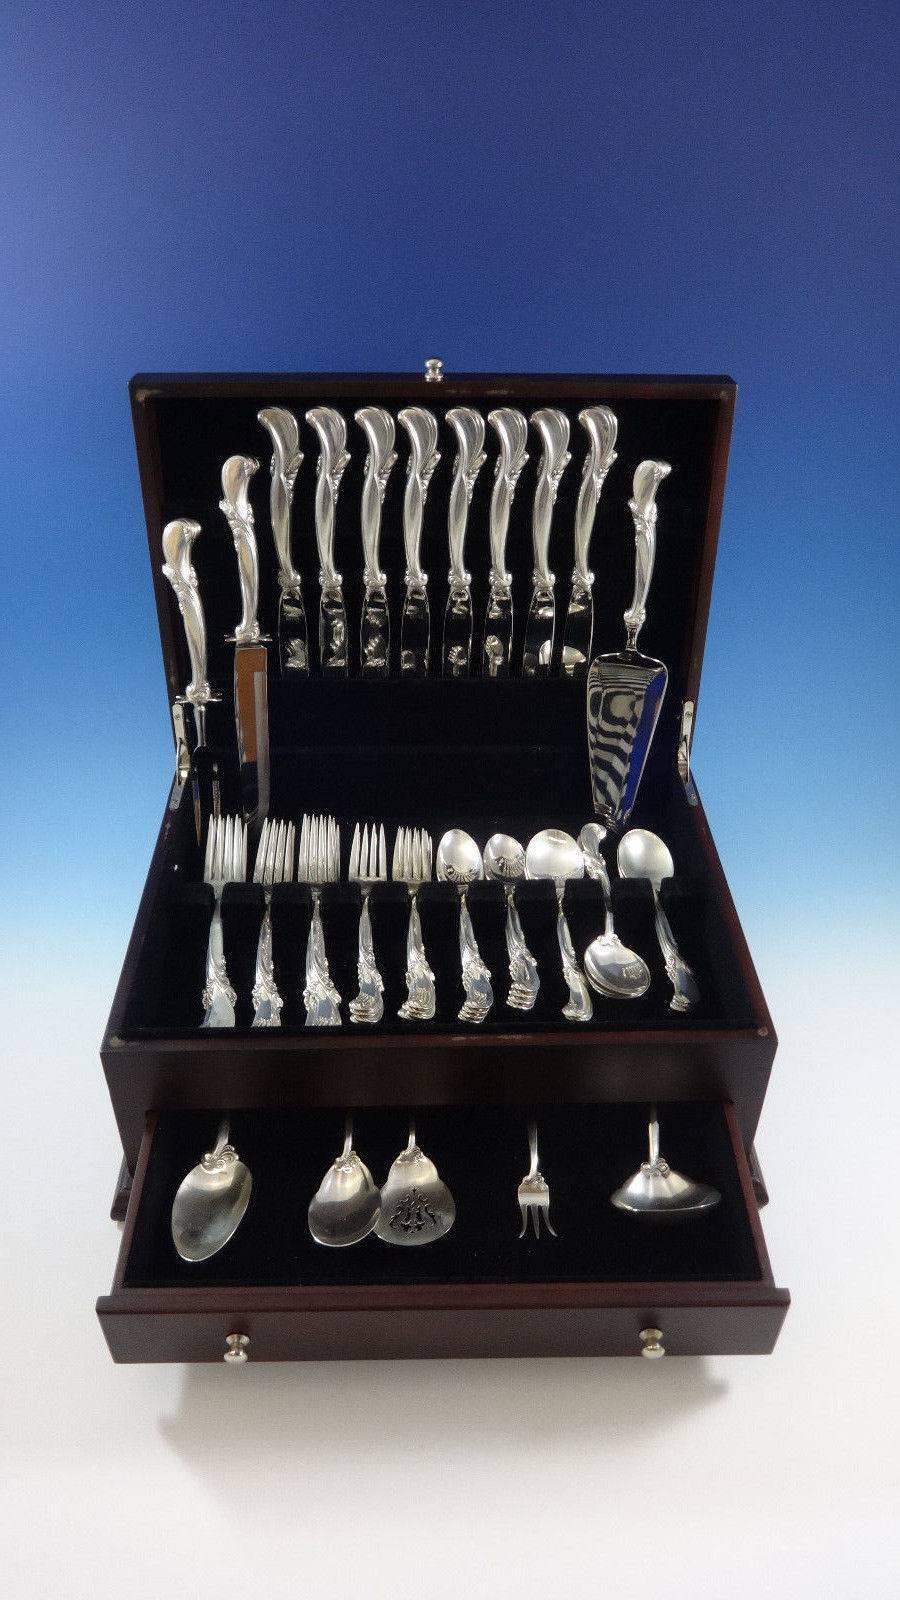 Waltz of Spring by Wallace sterling silver flatware set of 40 pieces. This dinner set includes: 

Eight dinner knives, 9 13/4